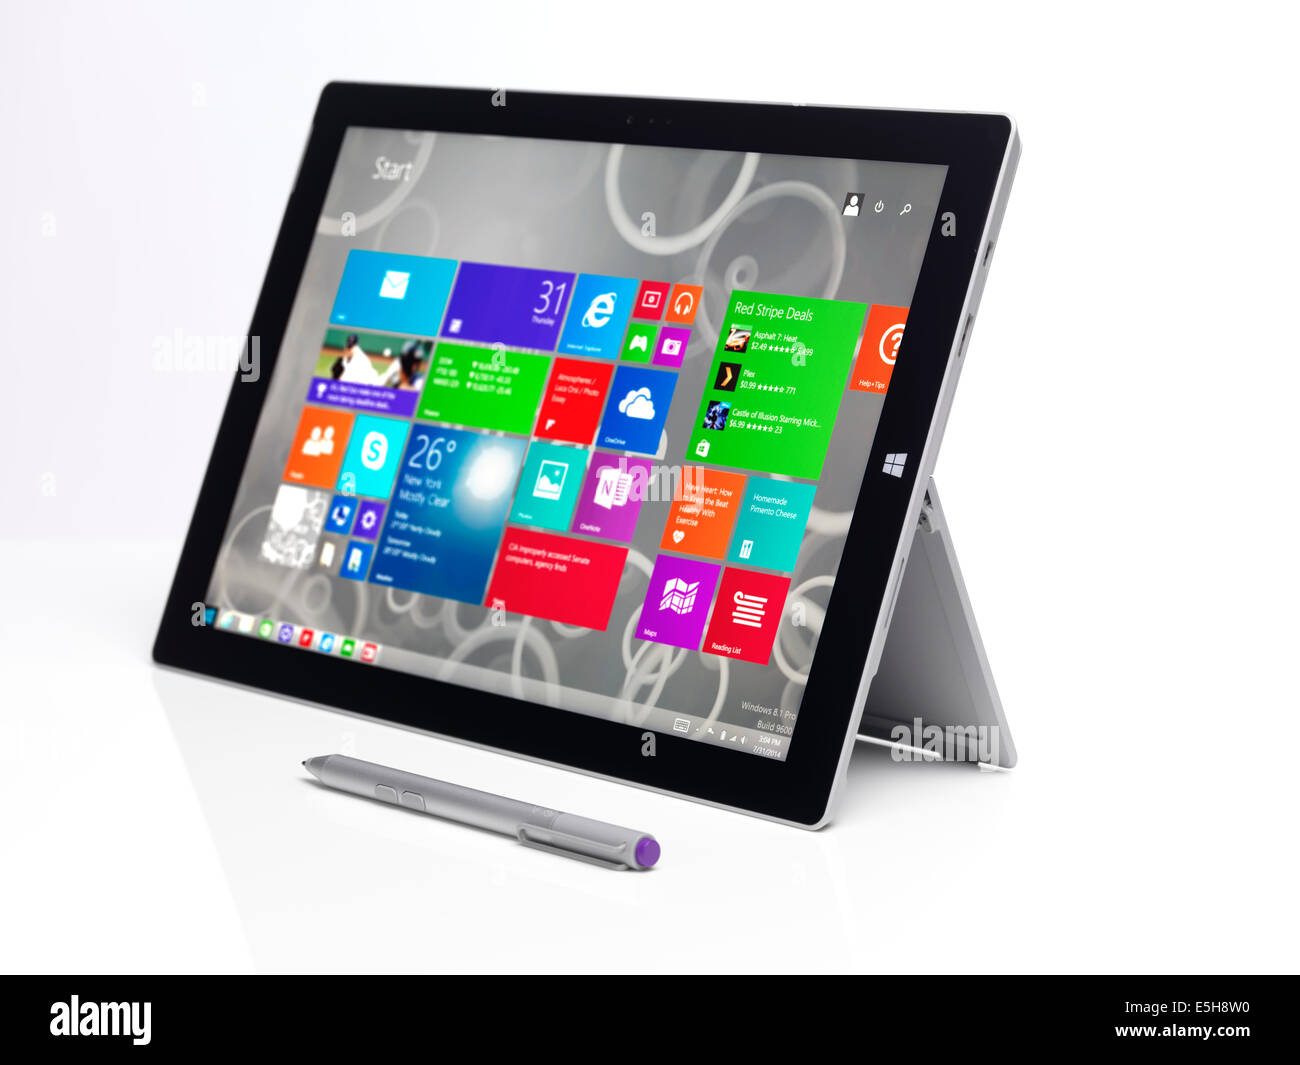 Microsoft Surface Pro 3 tablet computer with Windows 8 start screen on display isolated on white background Stock Photo